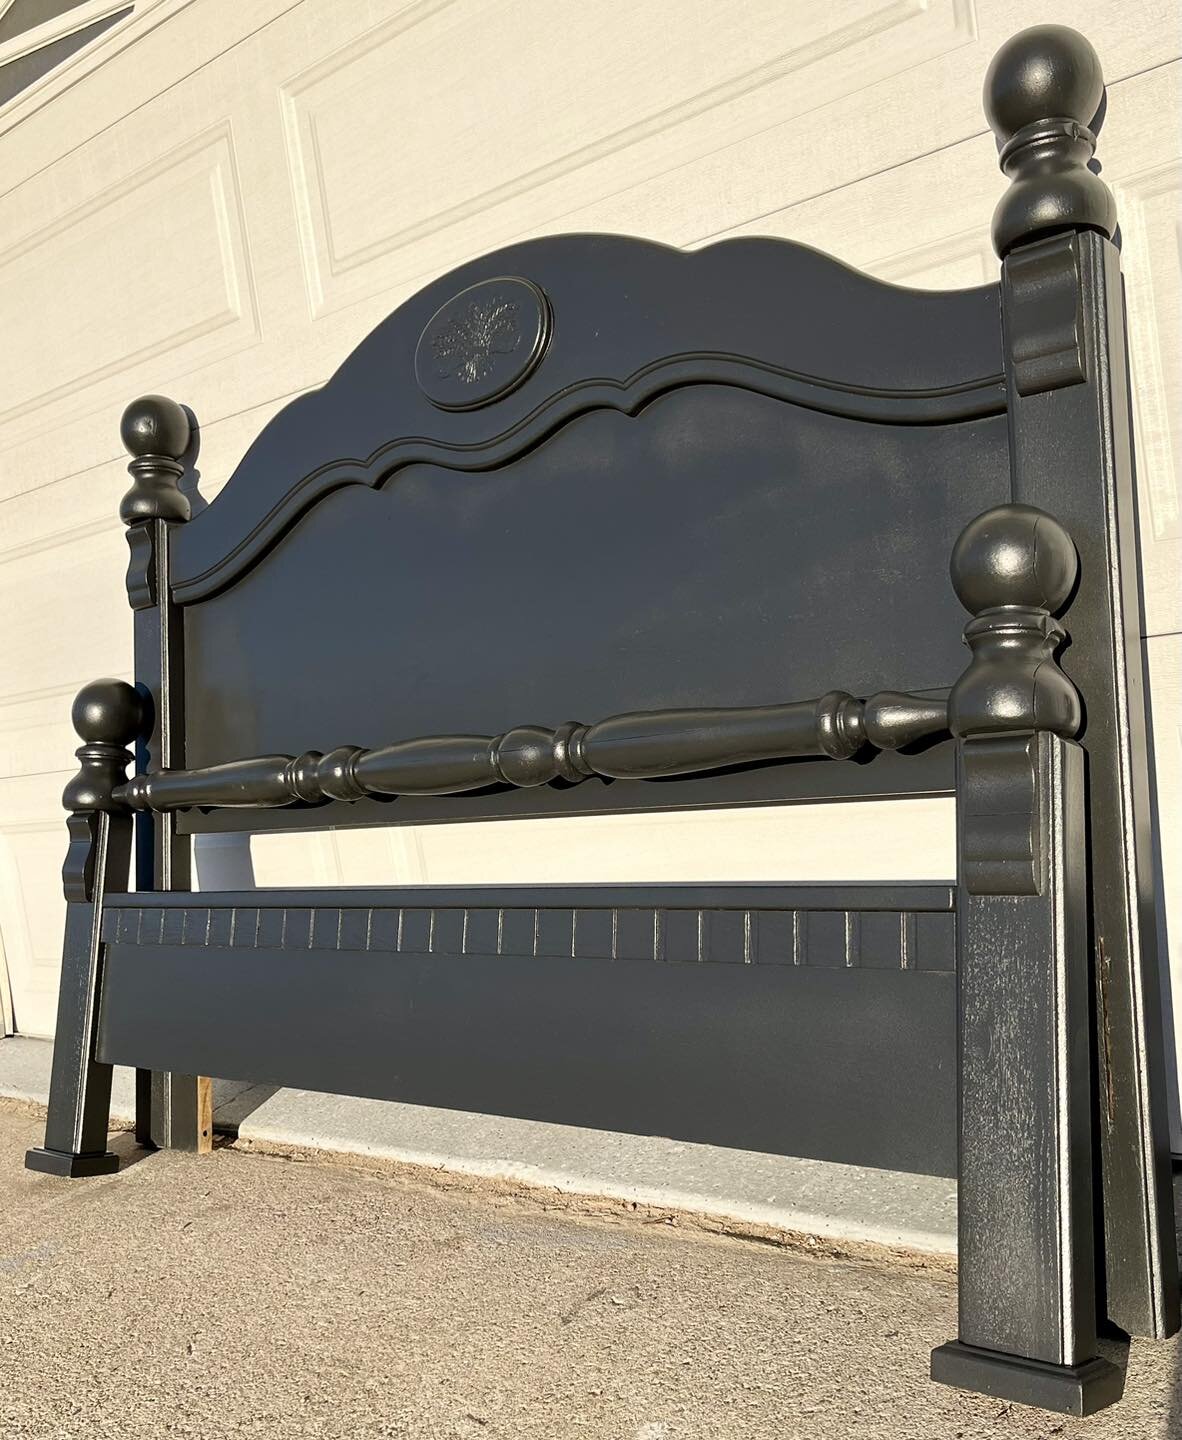 This Refinished headboard &amp; footboard with metal bed frame is now finished &amp; available for a new home! 

$125 

This wooden headboard &amp; footboard was been refinished in &ldquo;onyx black&rdquo; semi gloss enamel paint in a paint sprayer a